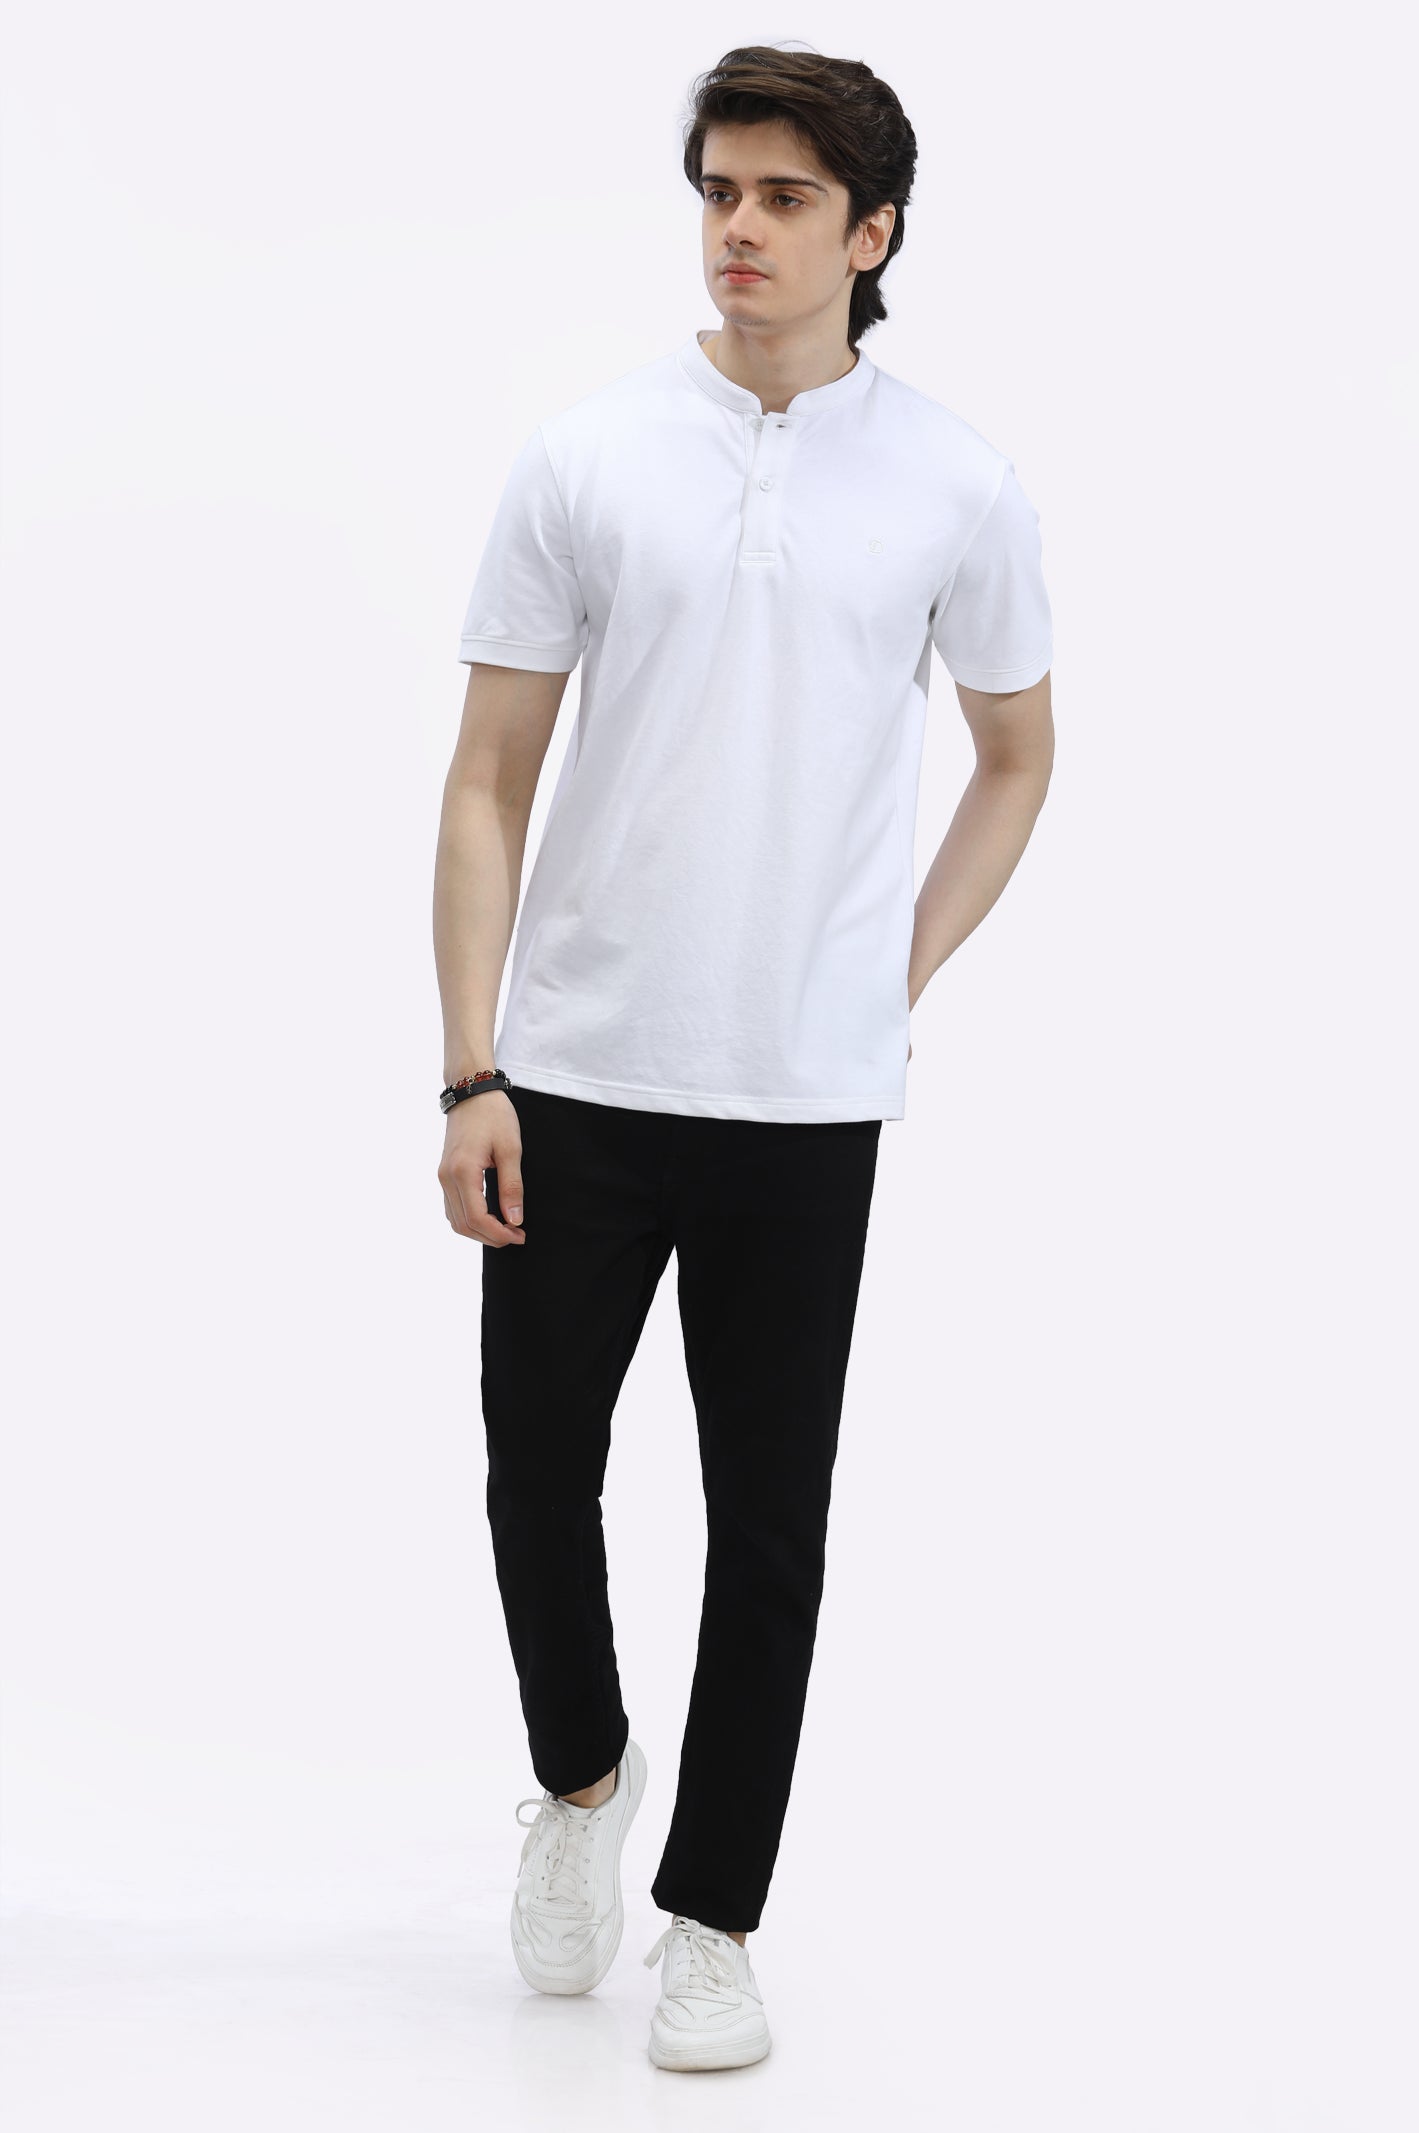 Band Collar Tees From Diners